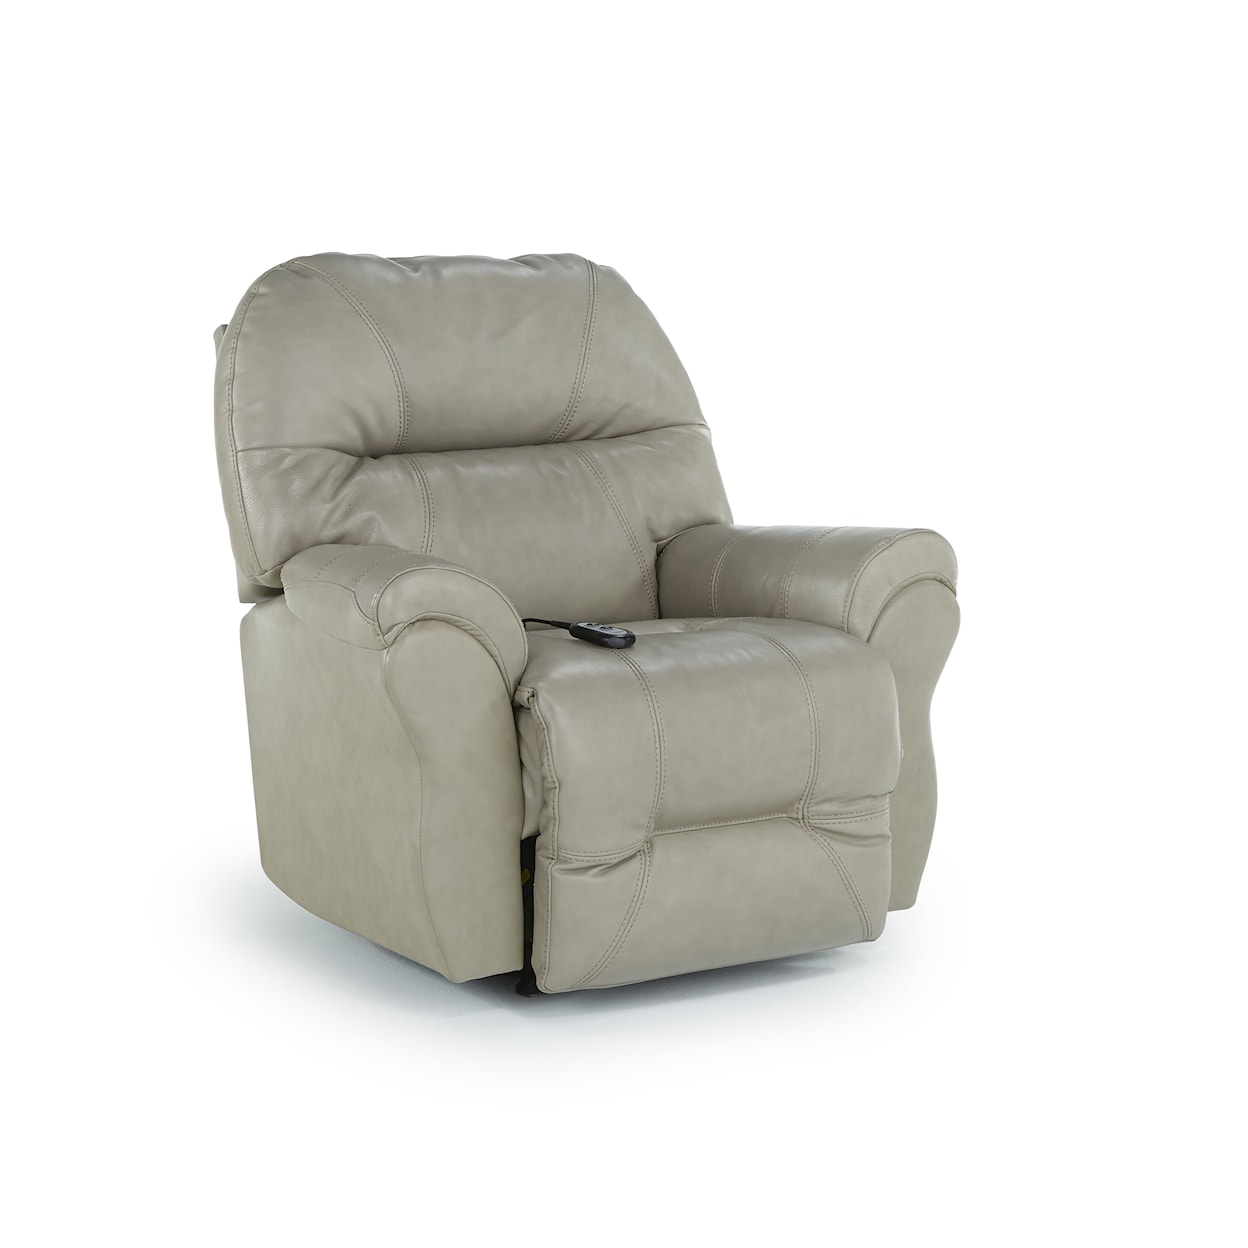 Best Home Furnishings Bodie Power Lift Recliner